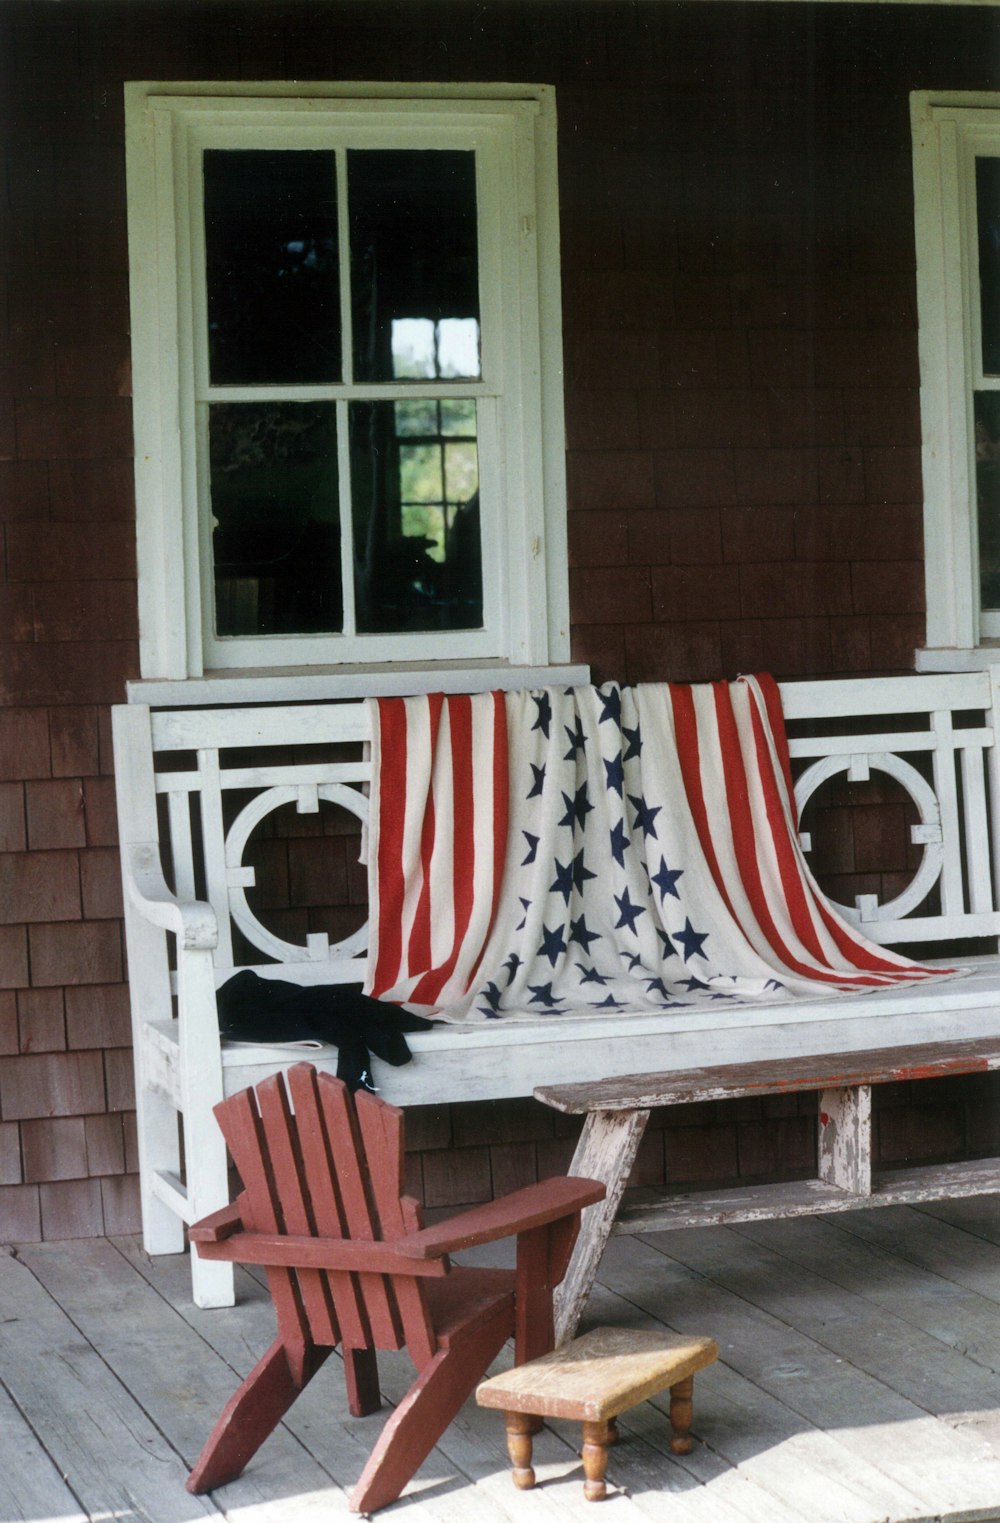 red and white striped folding chairs on brown wooden porch